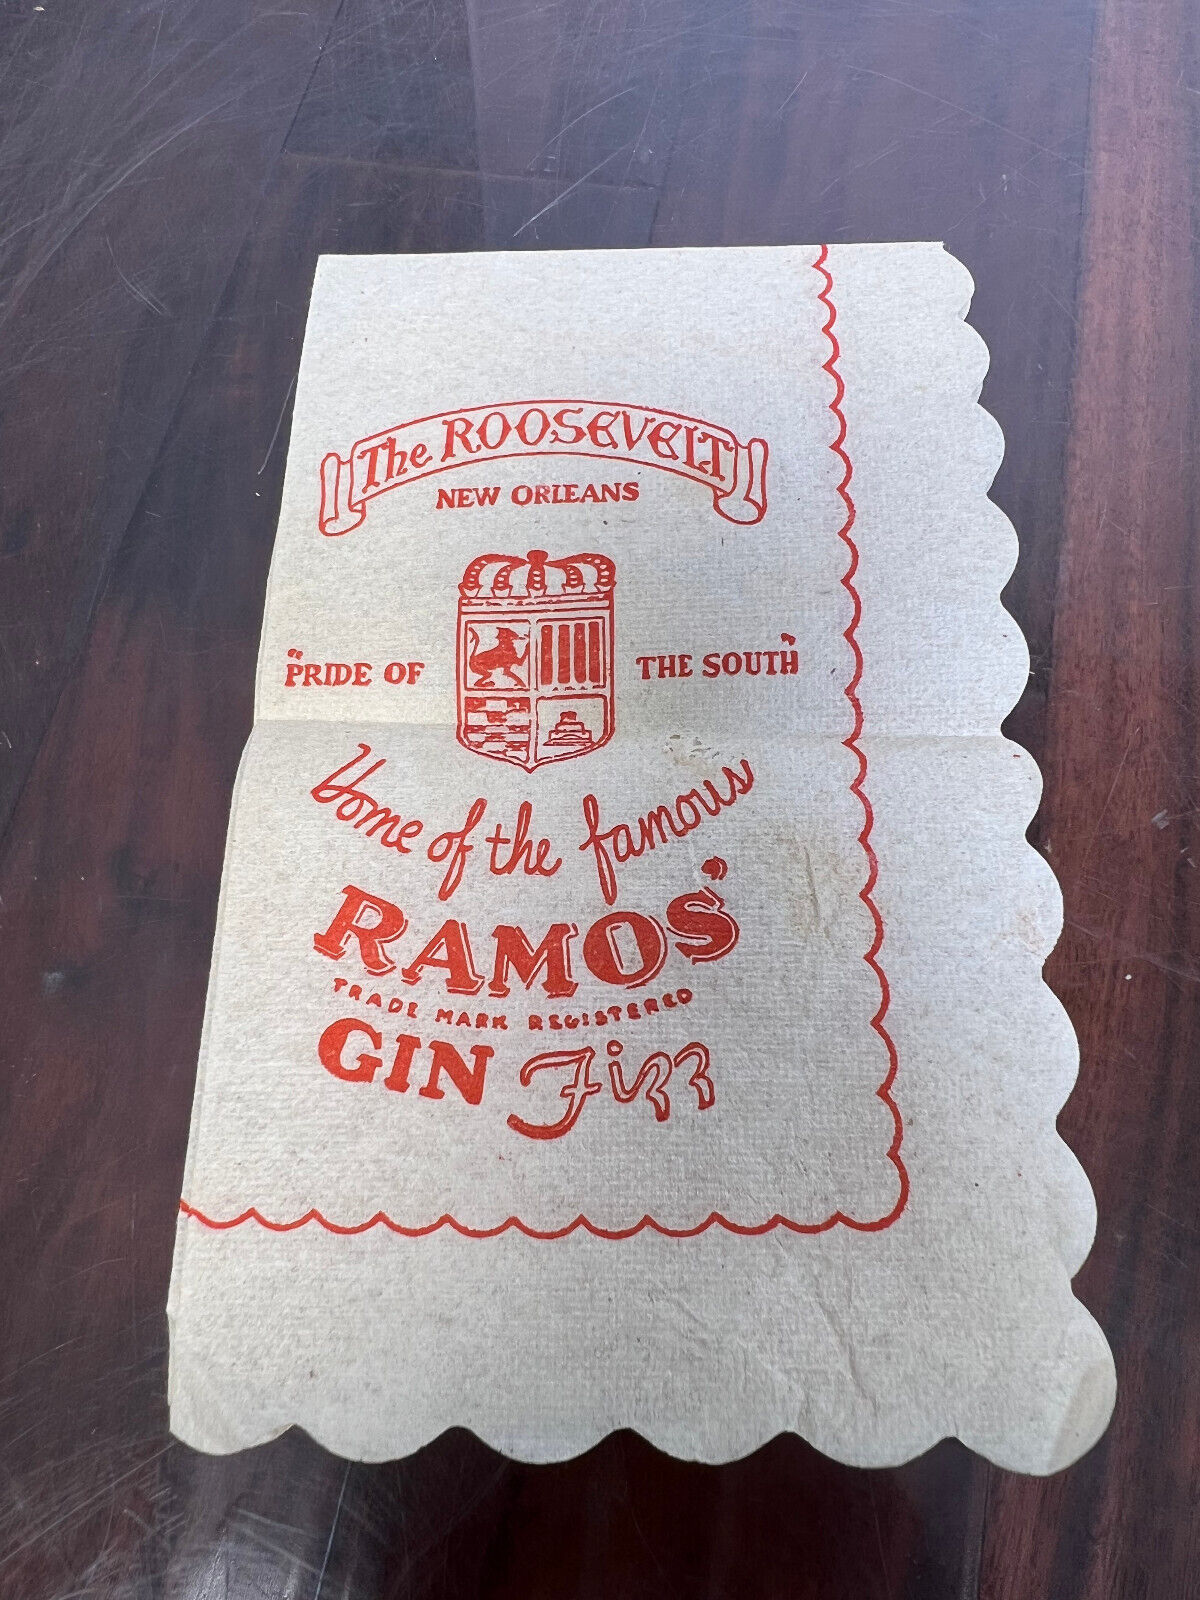 Vintage The Roosevelt In New Orleans Pride of the South Ramos Gin Fizz Napkin